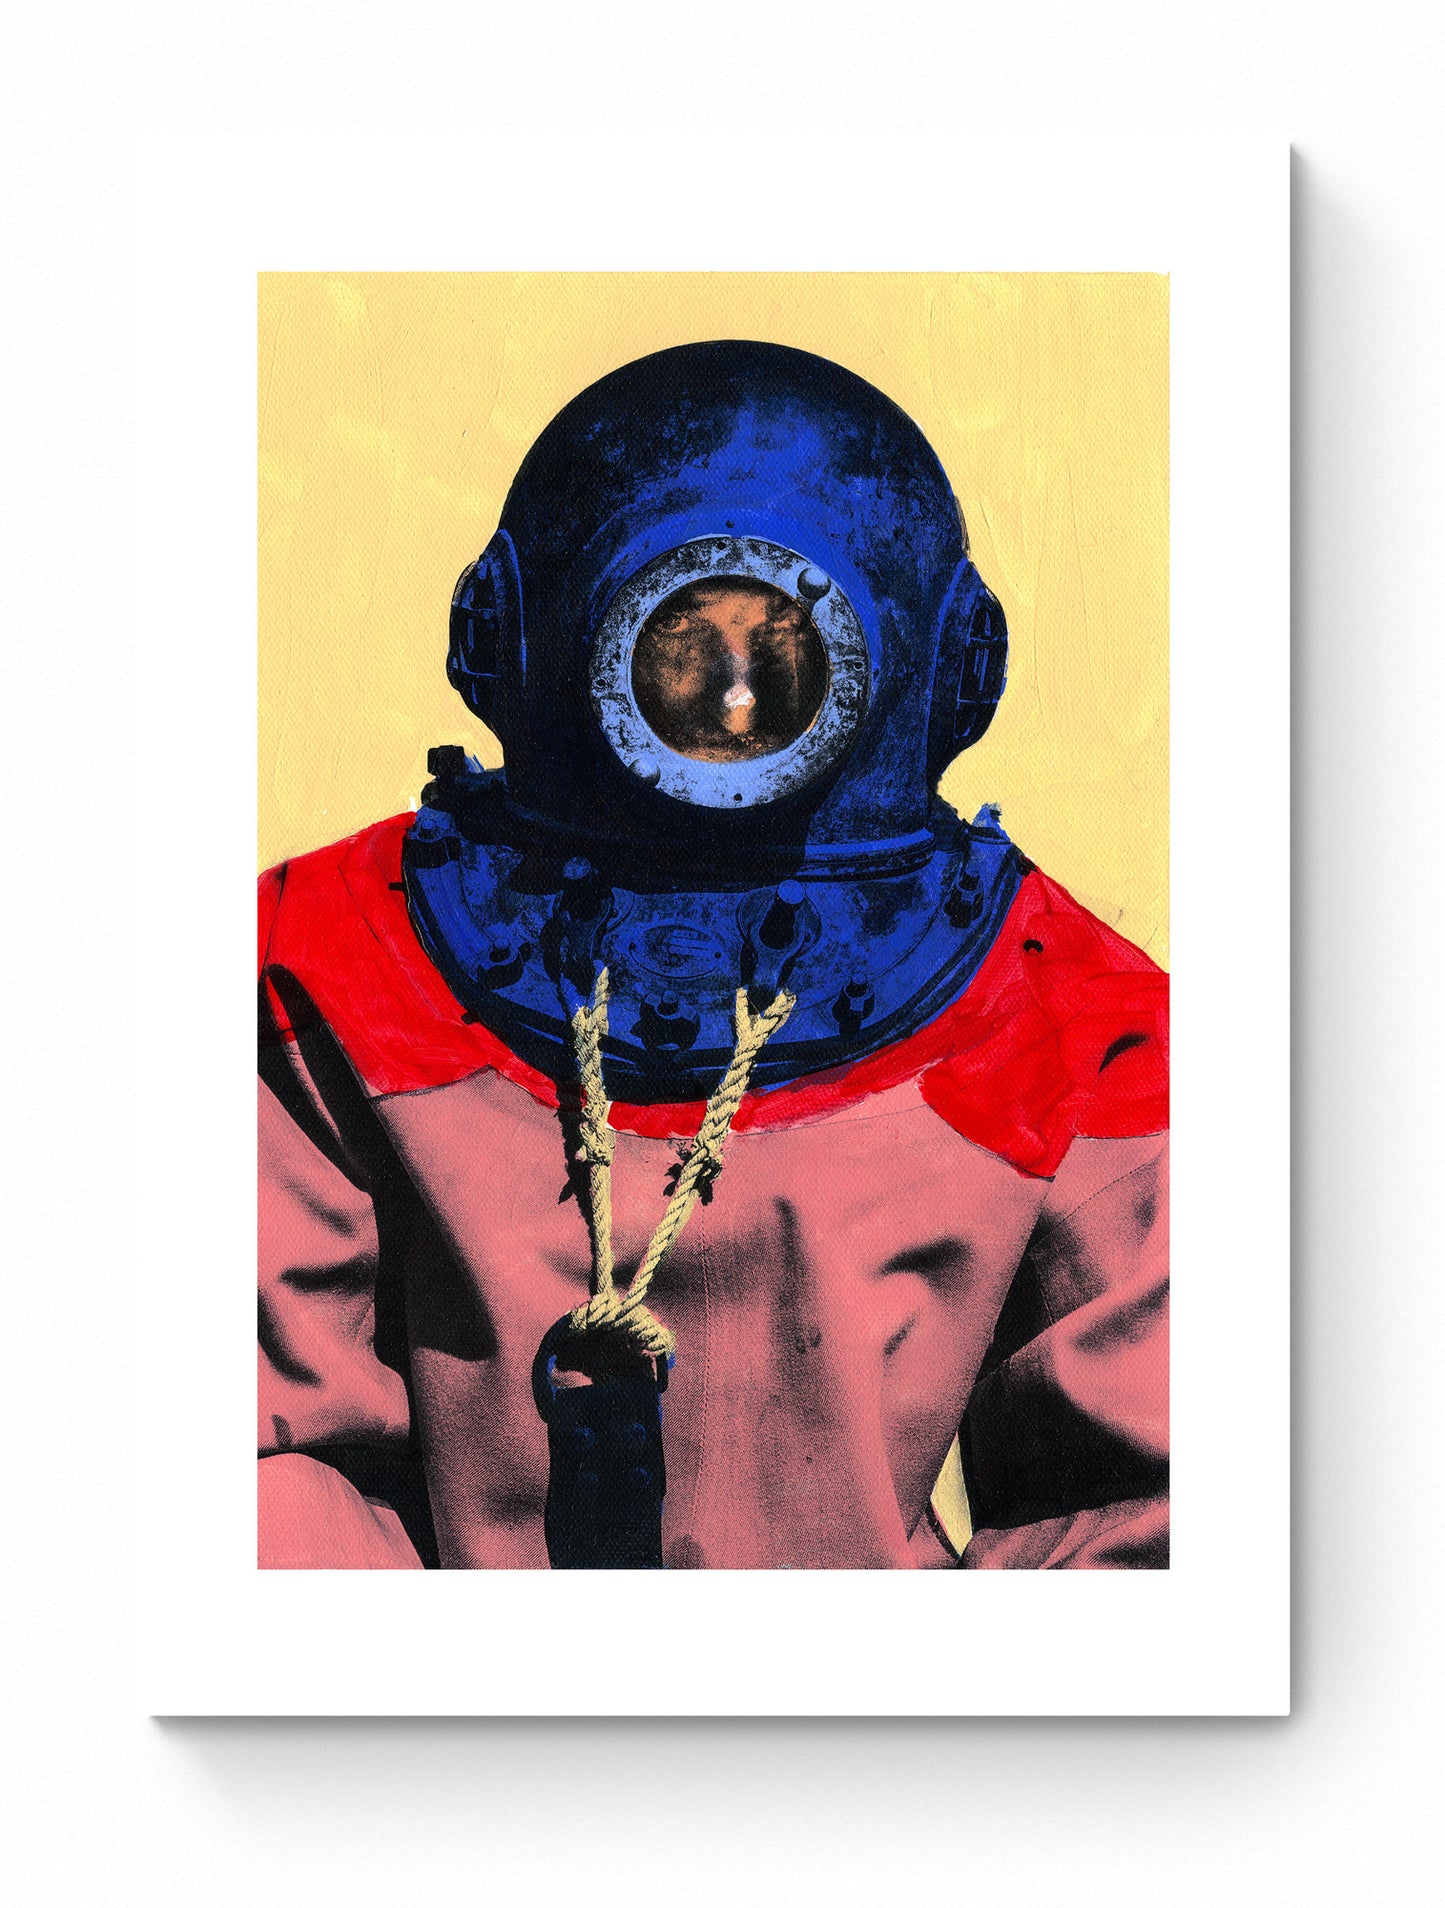 Painting Pop Art Wall Art from Greece | Canary & Blue sponge diver from Kalymnos island, by George Tatakis - poster